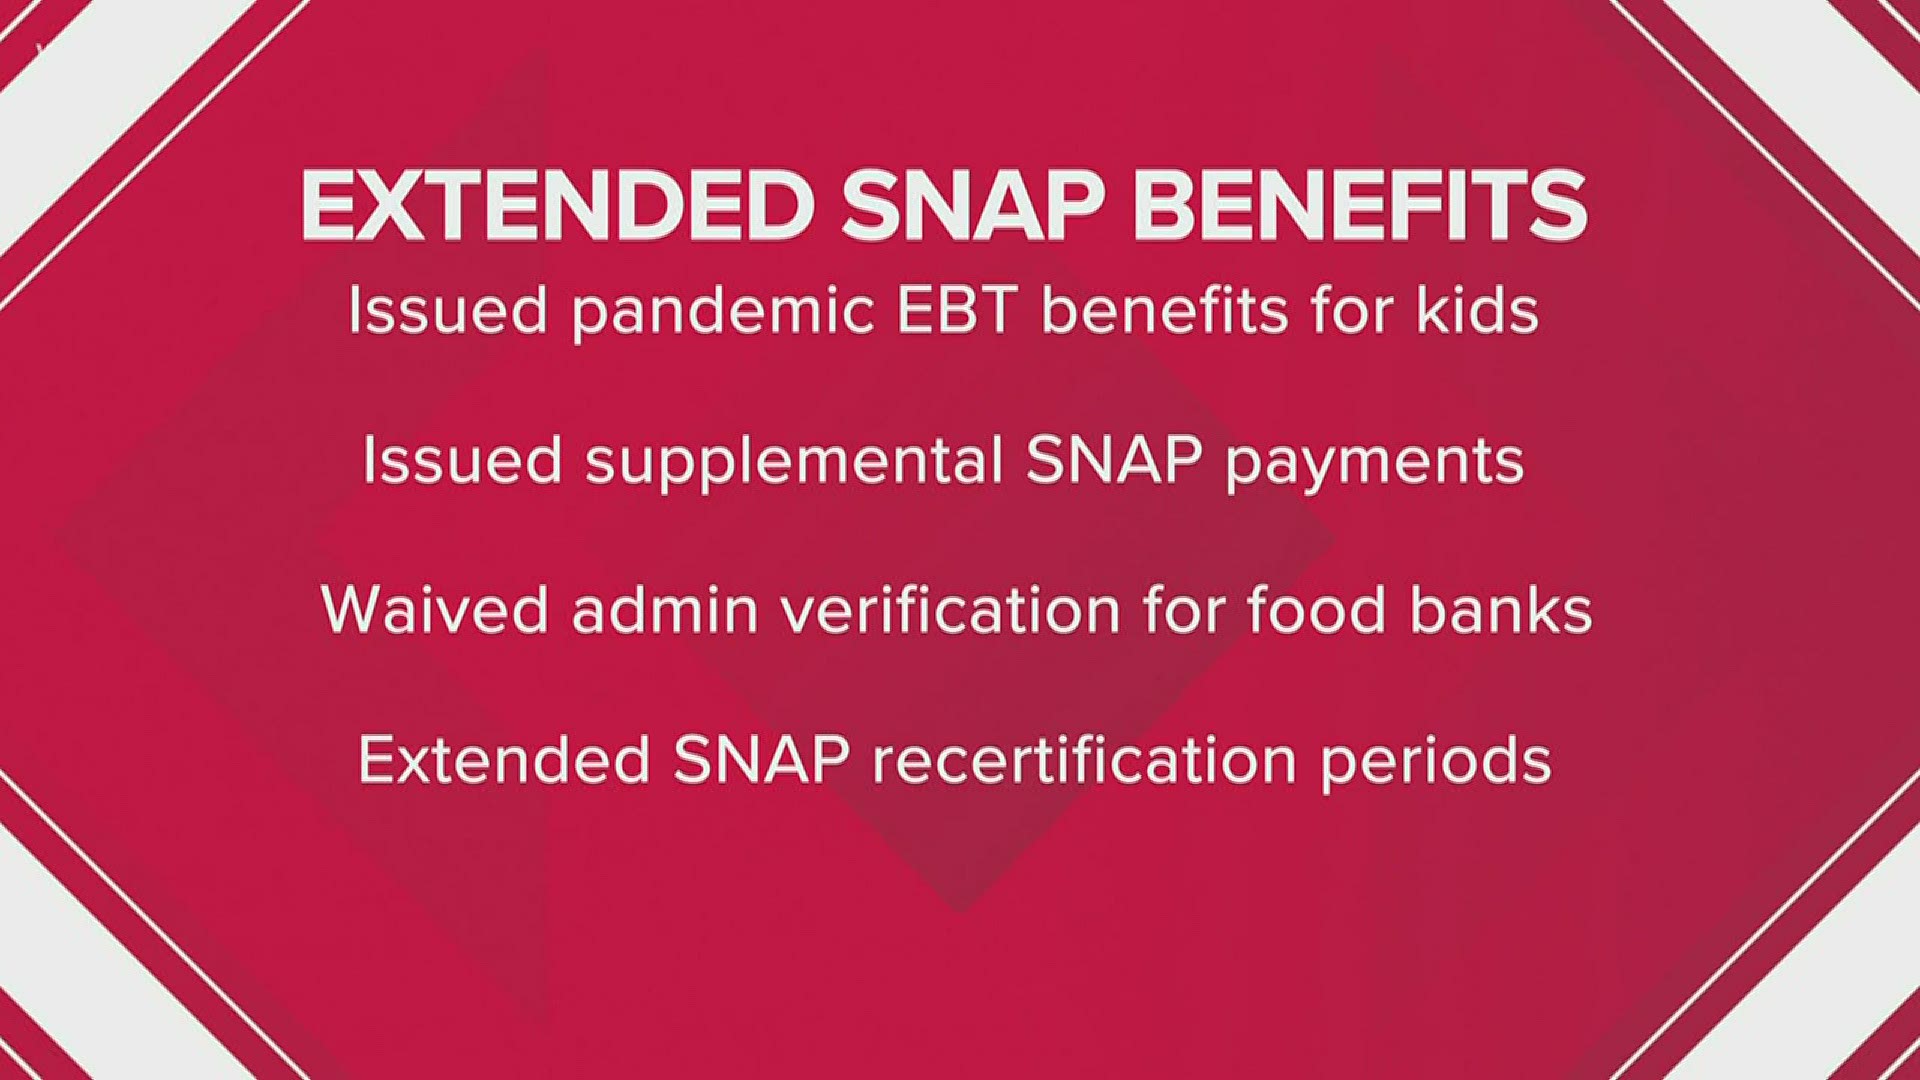 Ohioans eligible for SNAP benefits can now use their cards to purchase food online through Walmart and Amazon.